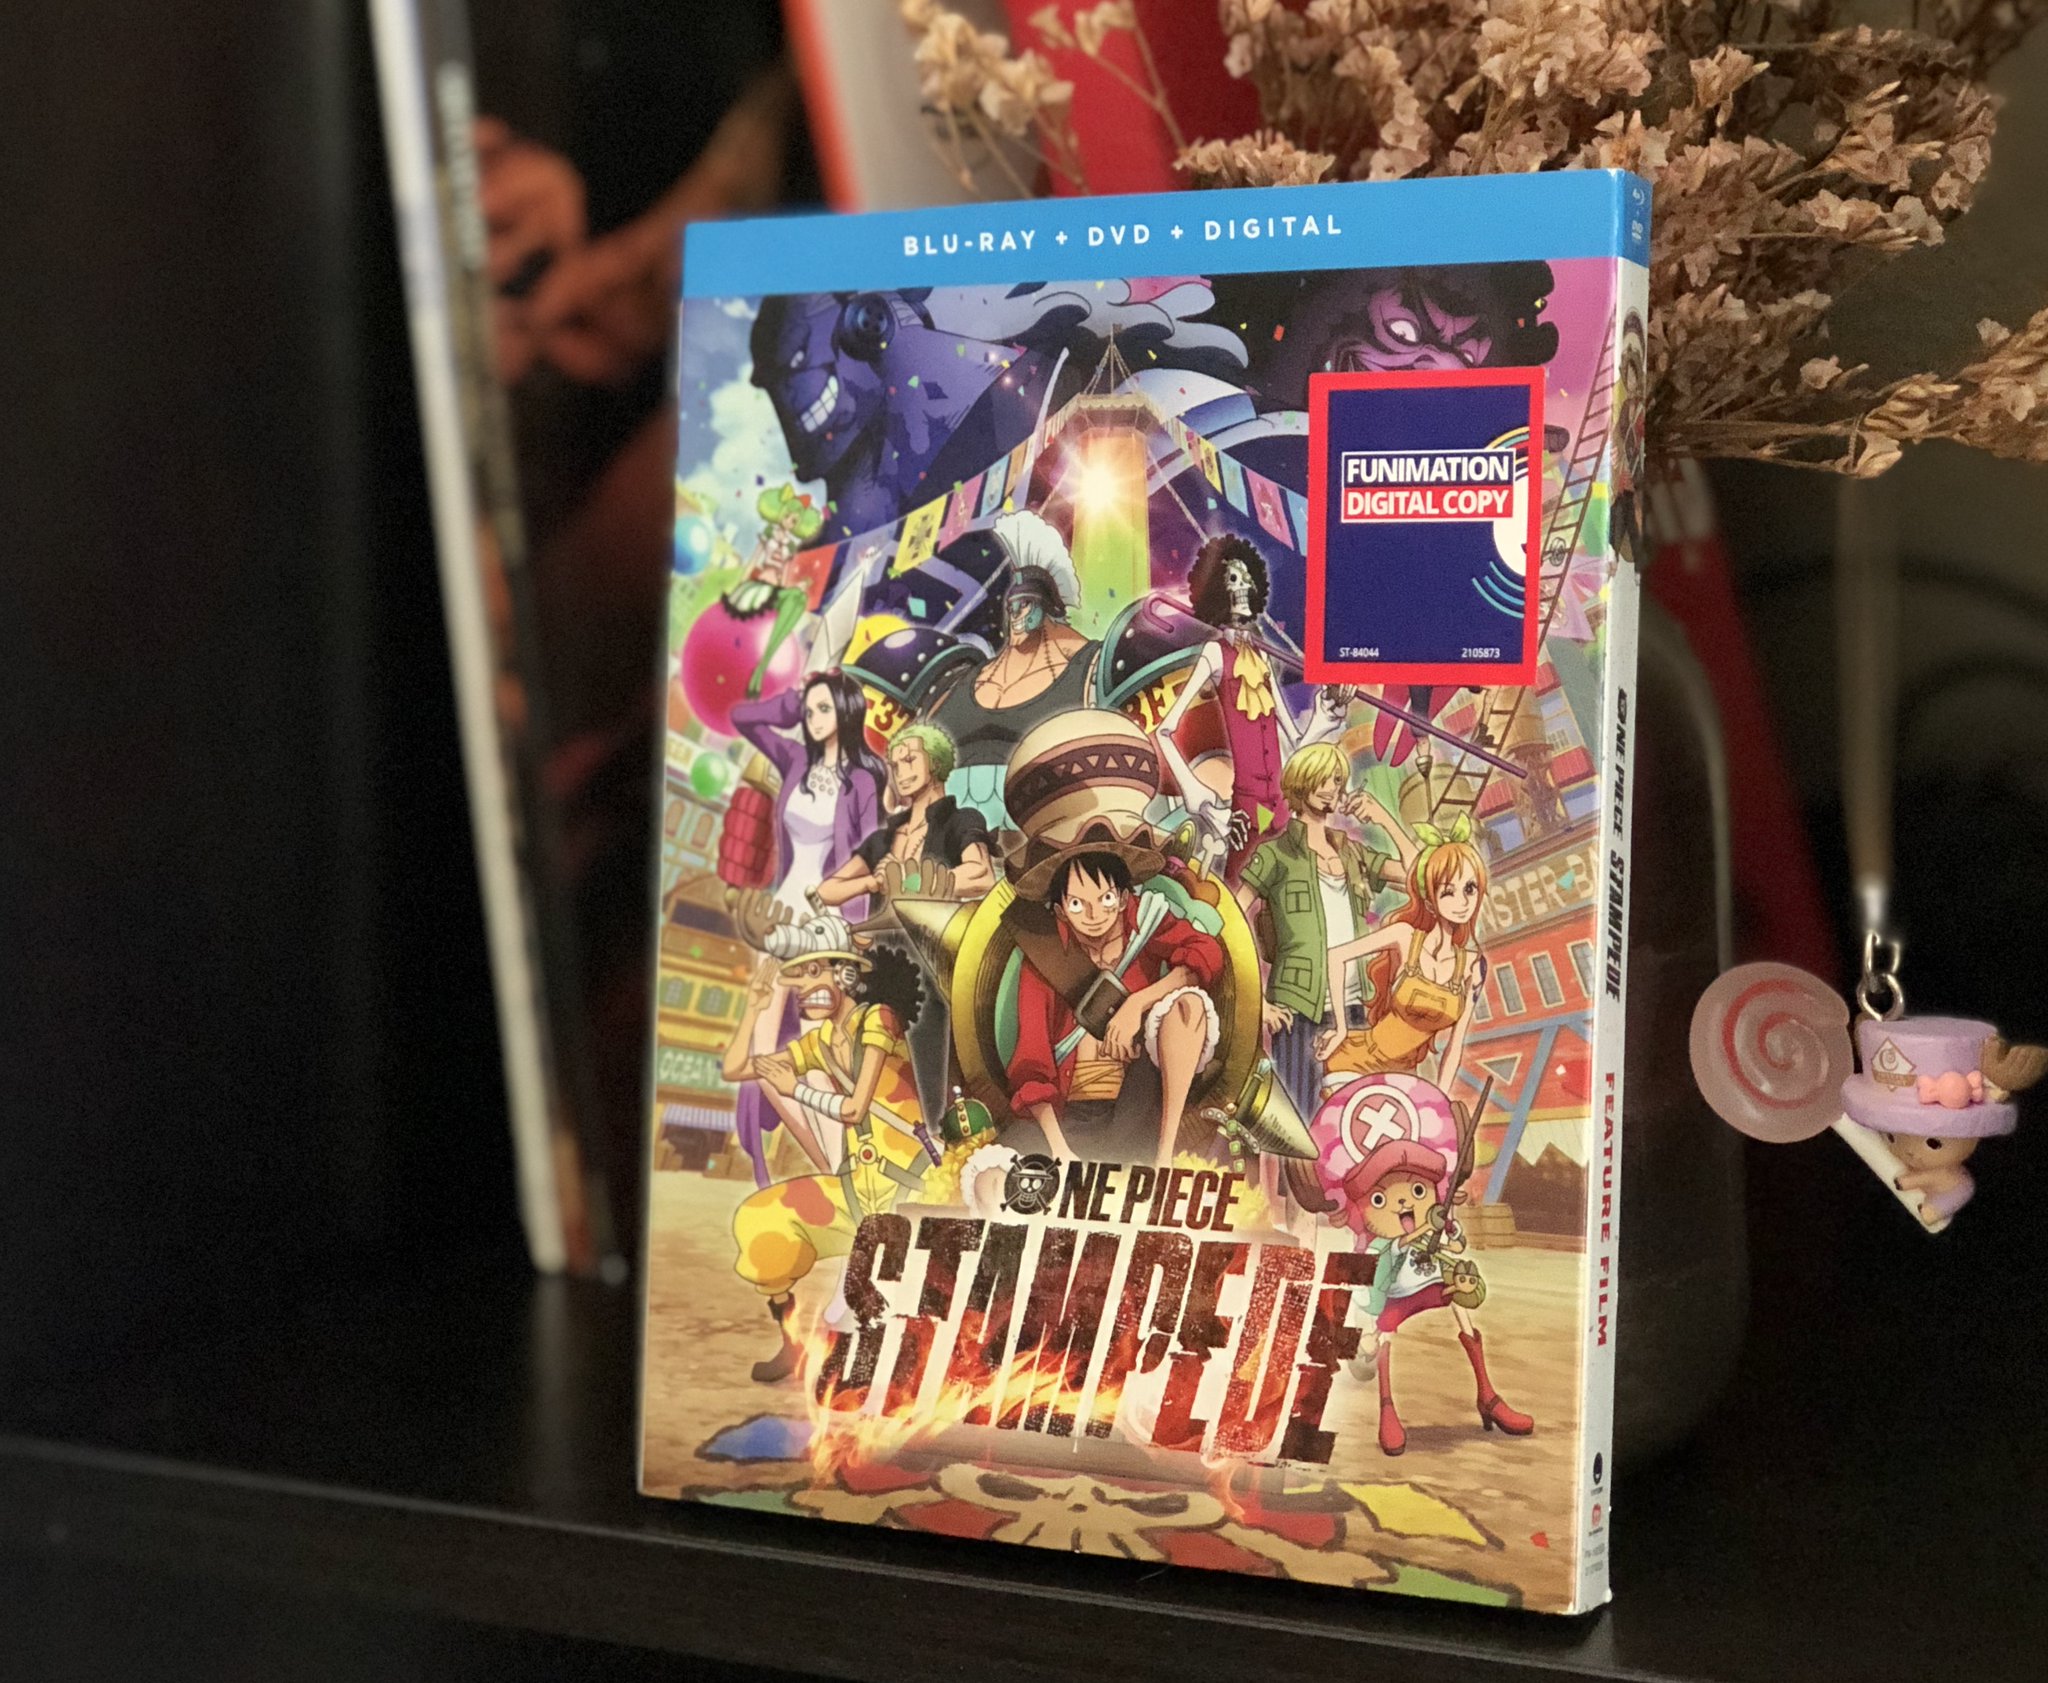 Funimation The One Piece Stampede Movie O Card Is So Colorful Own It Now On Blu Ray Dvd Digital T Co Qe6ioyhhbm Onepiecestampede Onepiece T Co 6t0gl35r4a Twitter